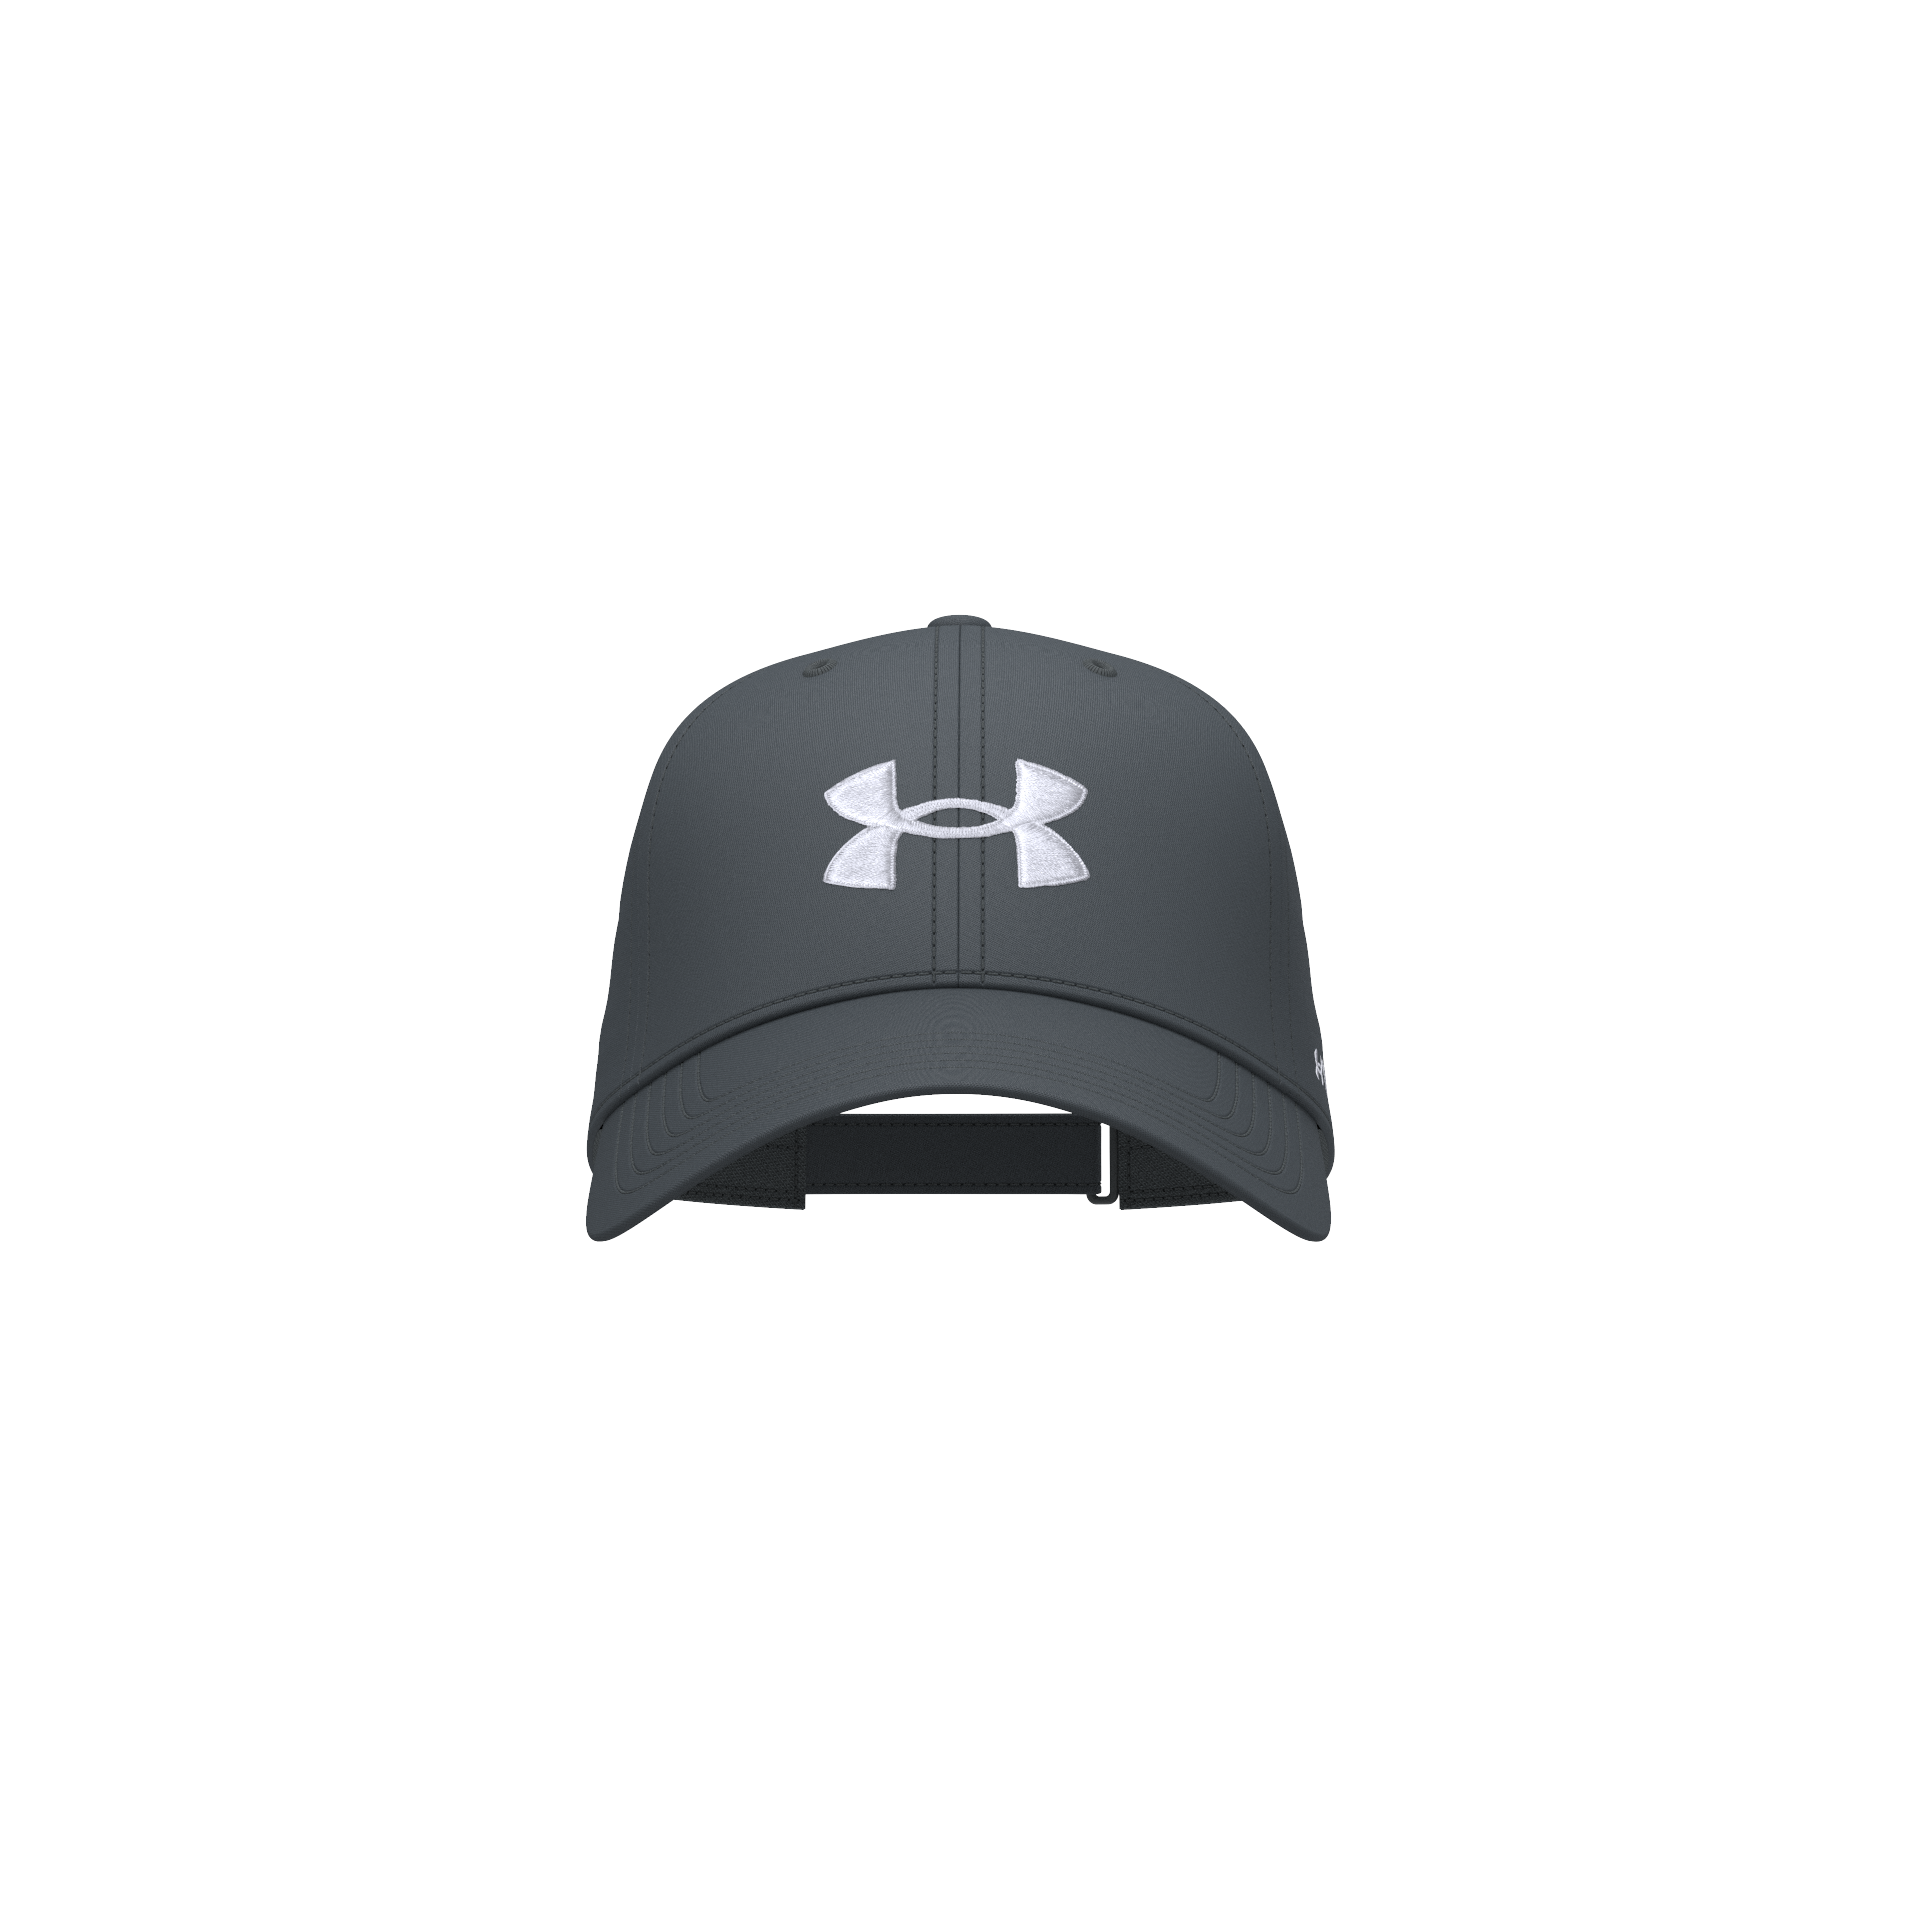 Under Armour Golf96 Hat Pitch Gray/White